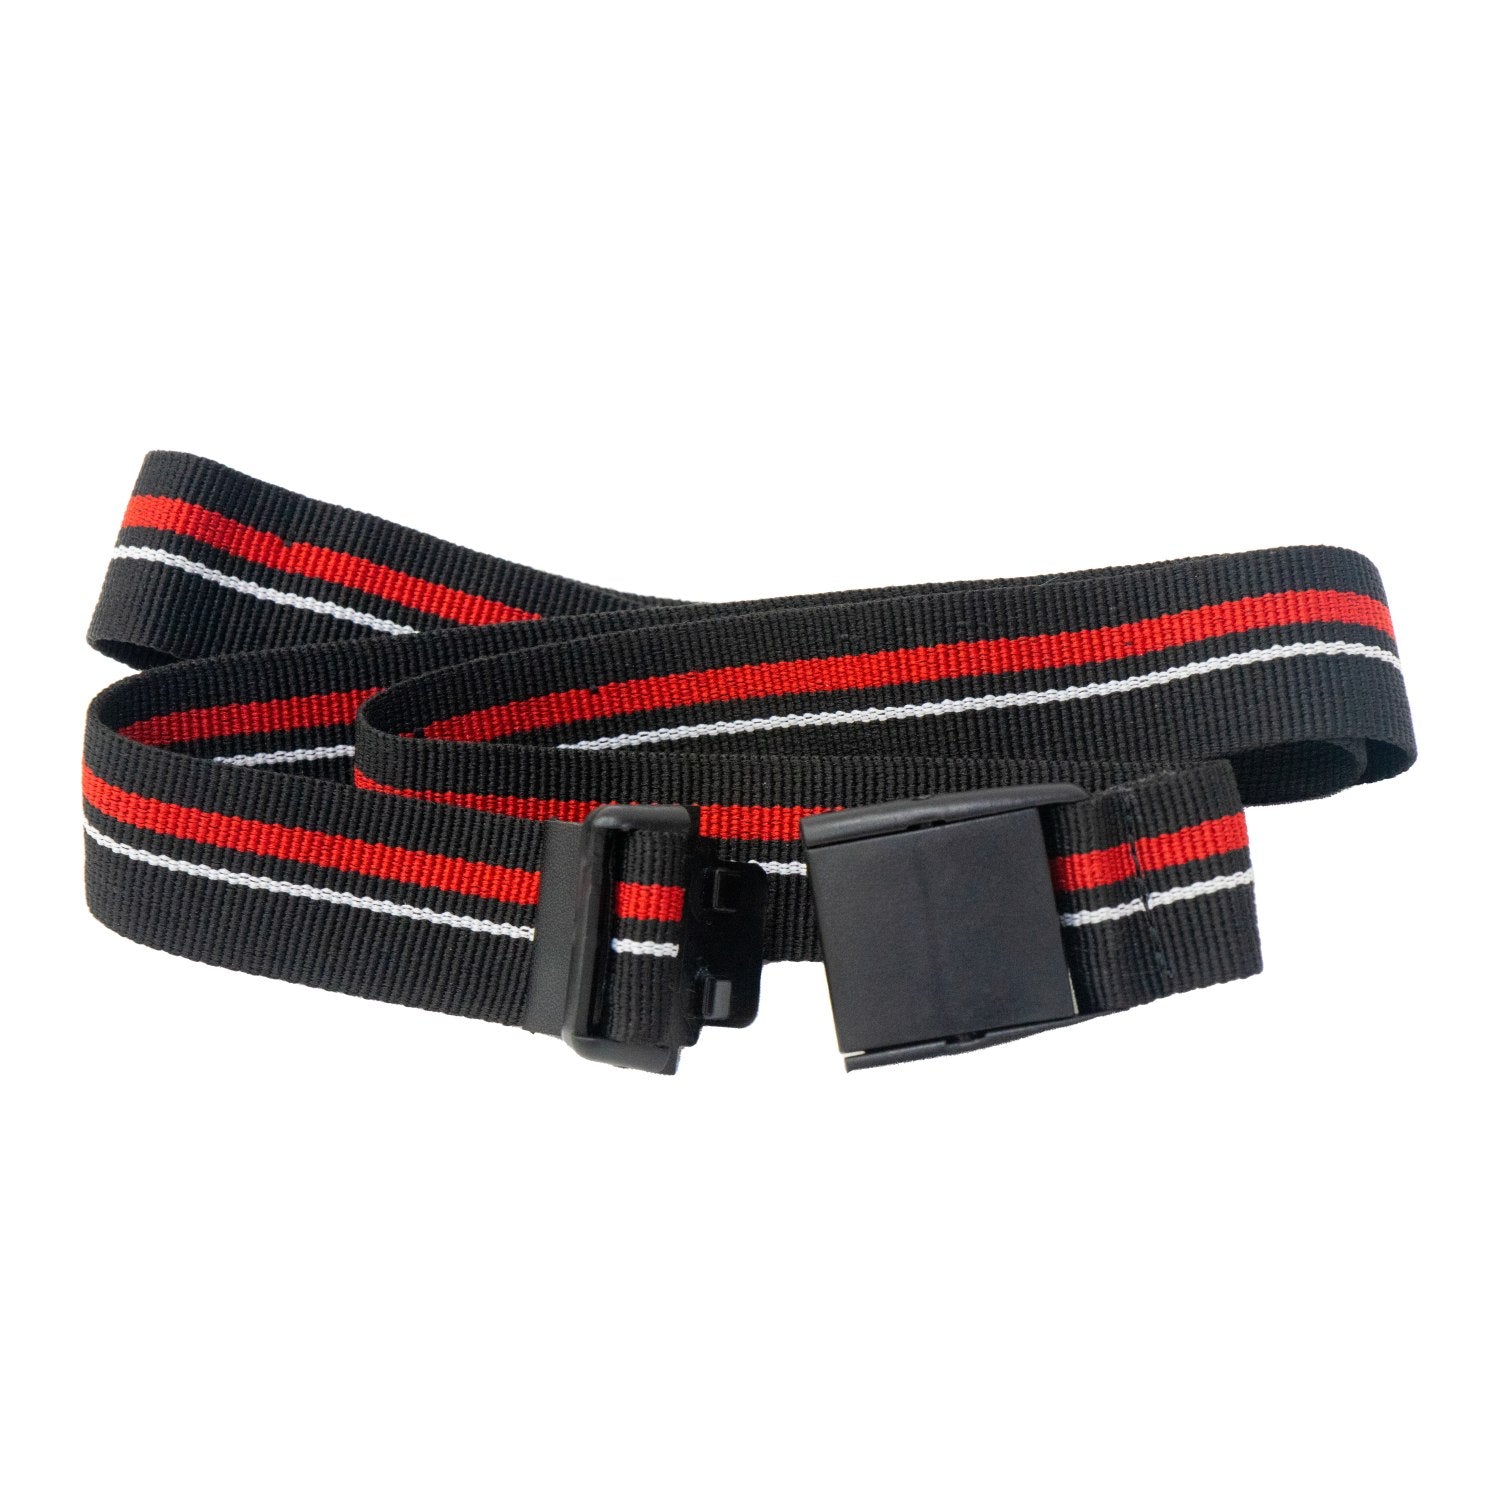 Buy Gokyo Belt for Hiking Trousers | Belt at Gokyo Outdoor Clothing & Gear